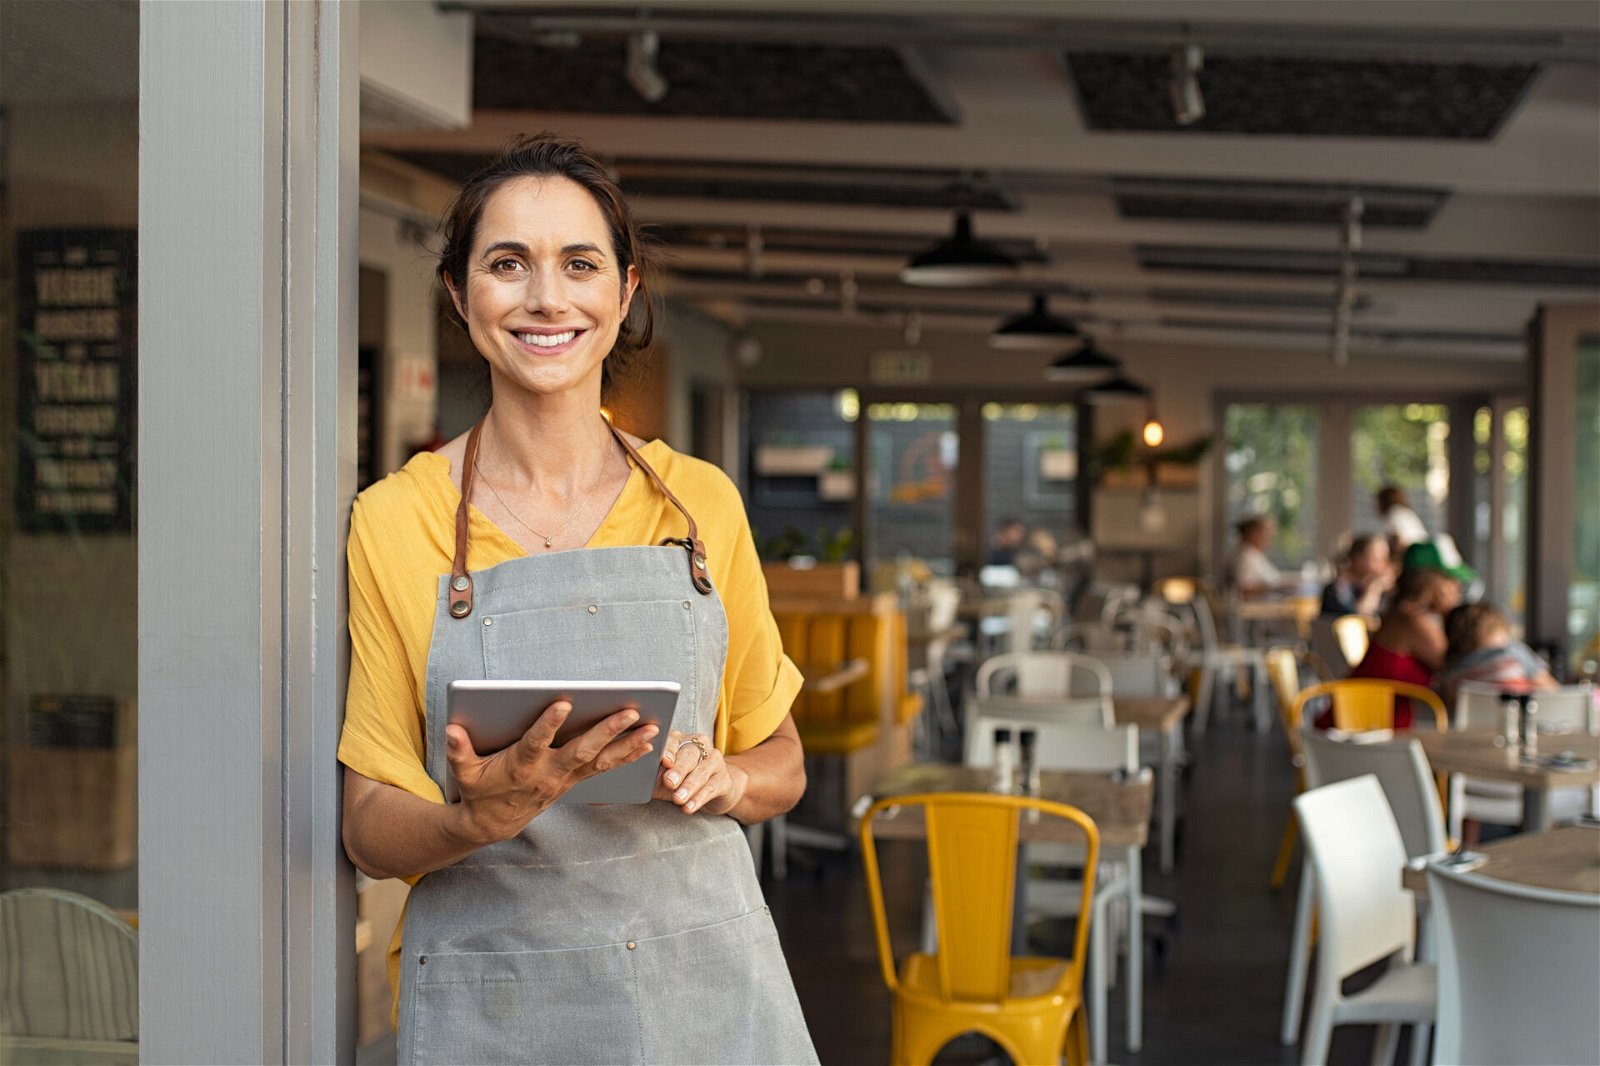 a woman in an apron holding a tablet.